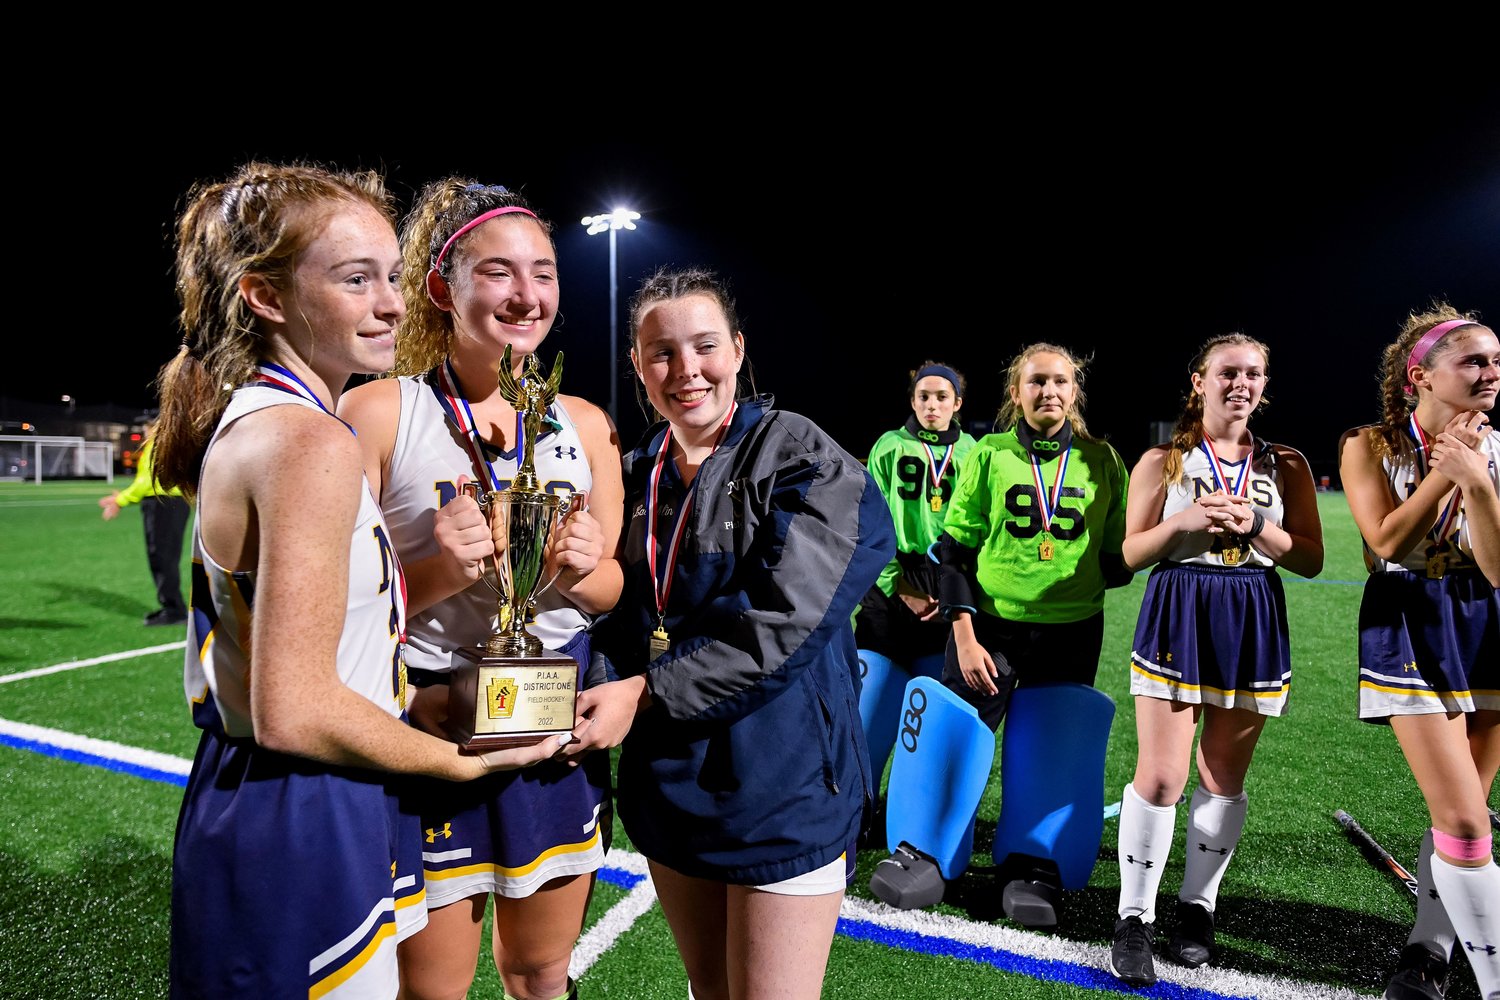 New Hope-Solebury captains hold the championship trophy.